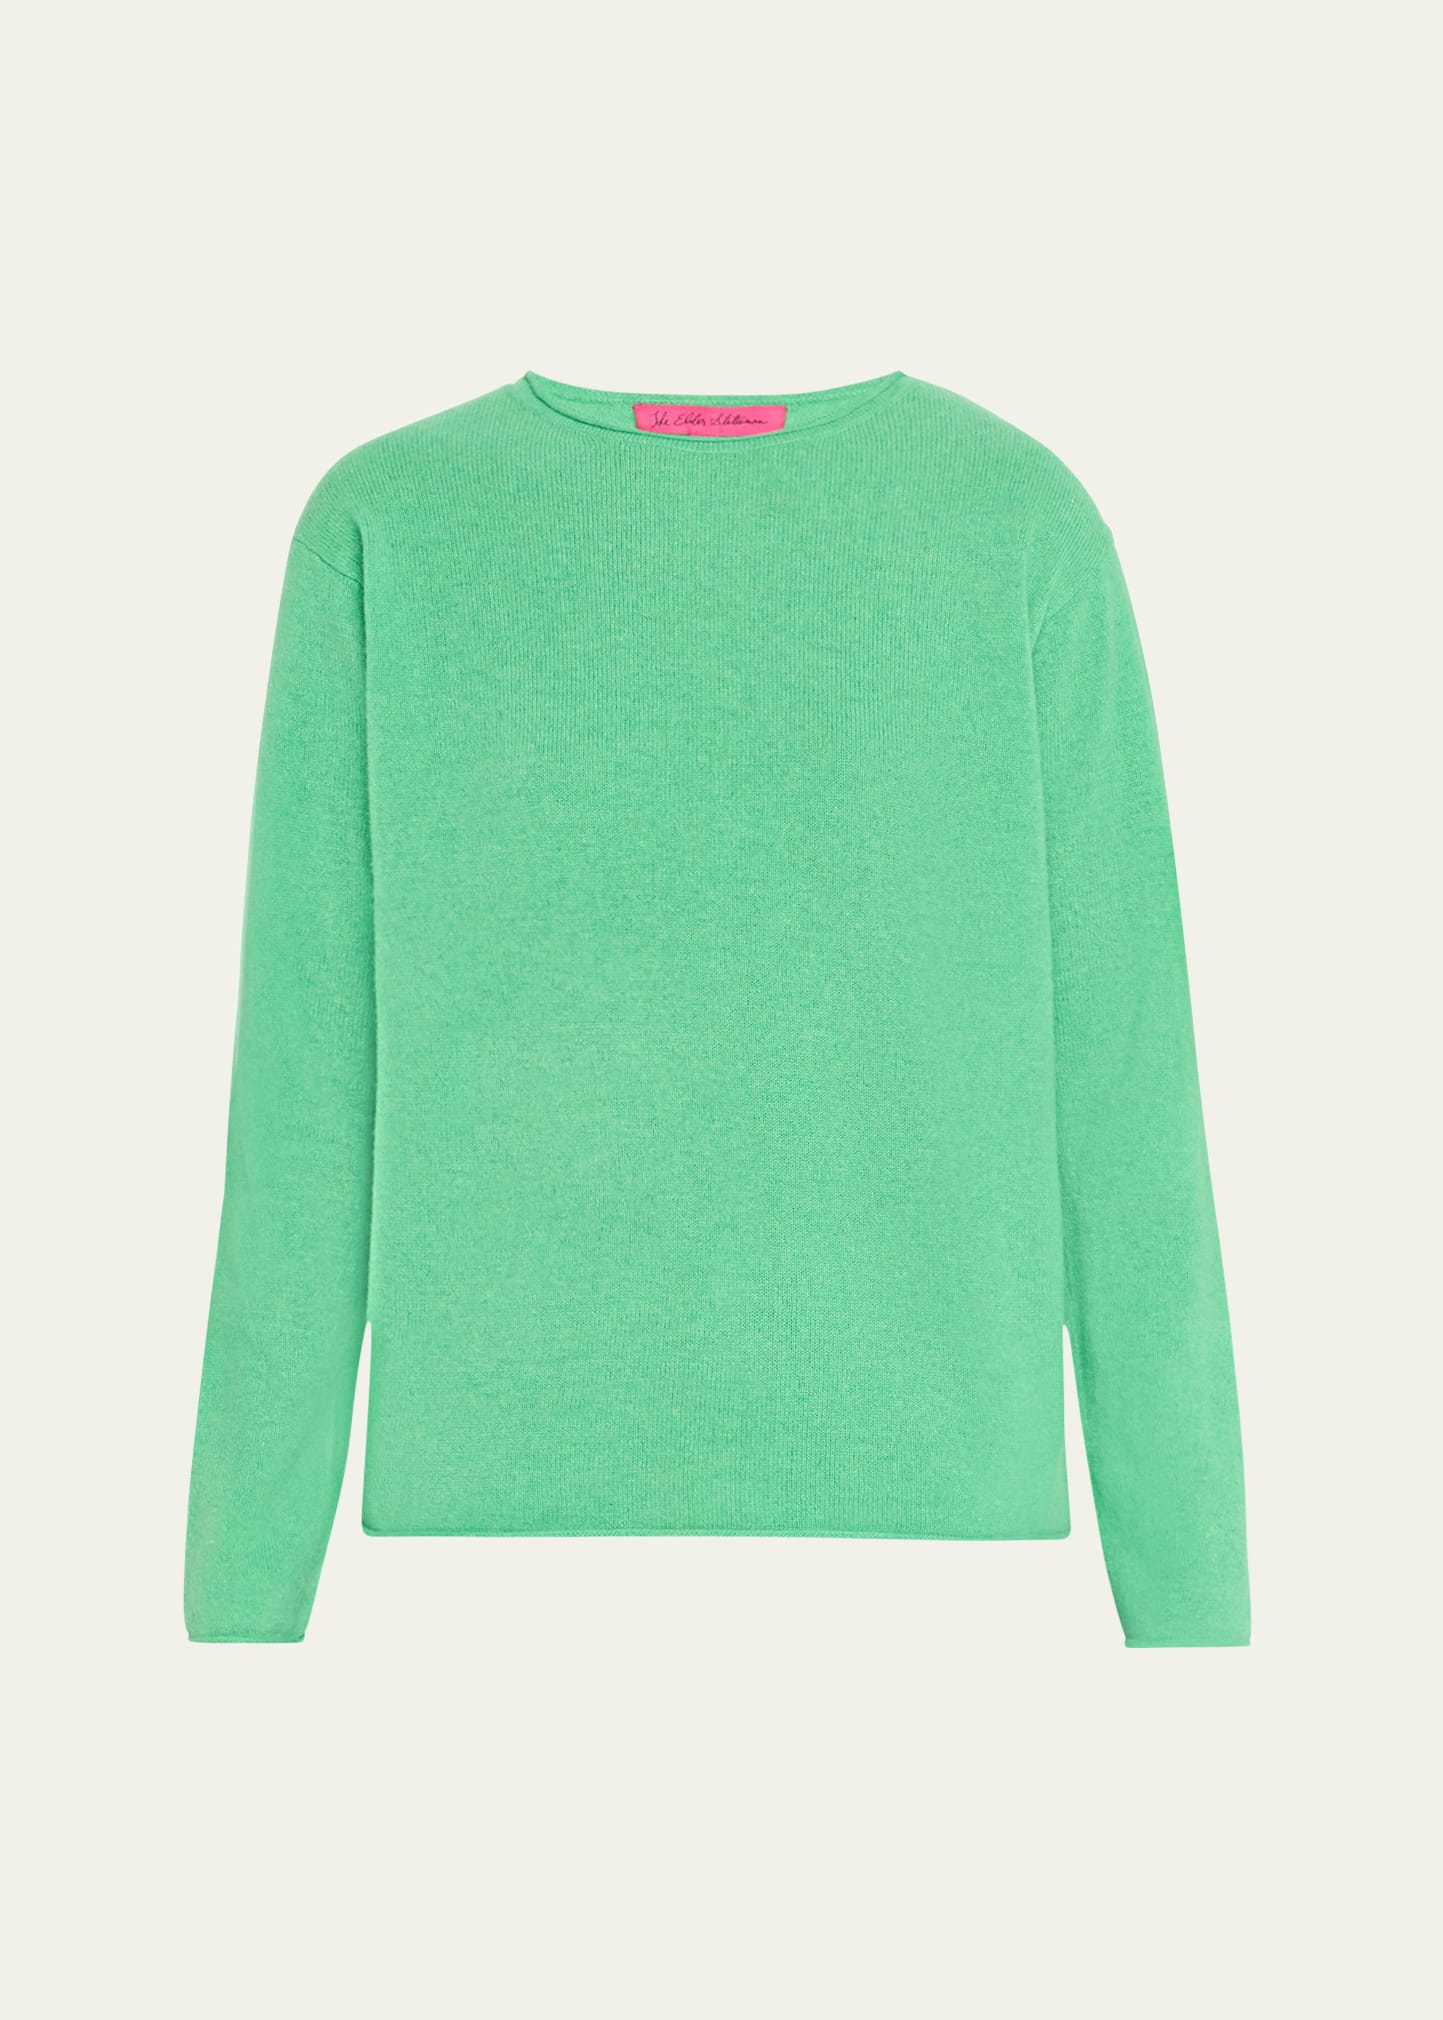 Tranquility Roll Cashmere Sweater